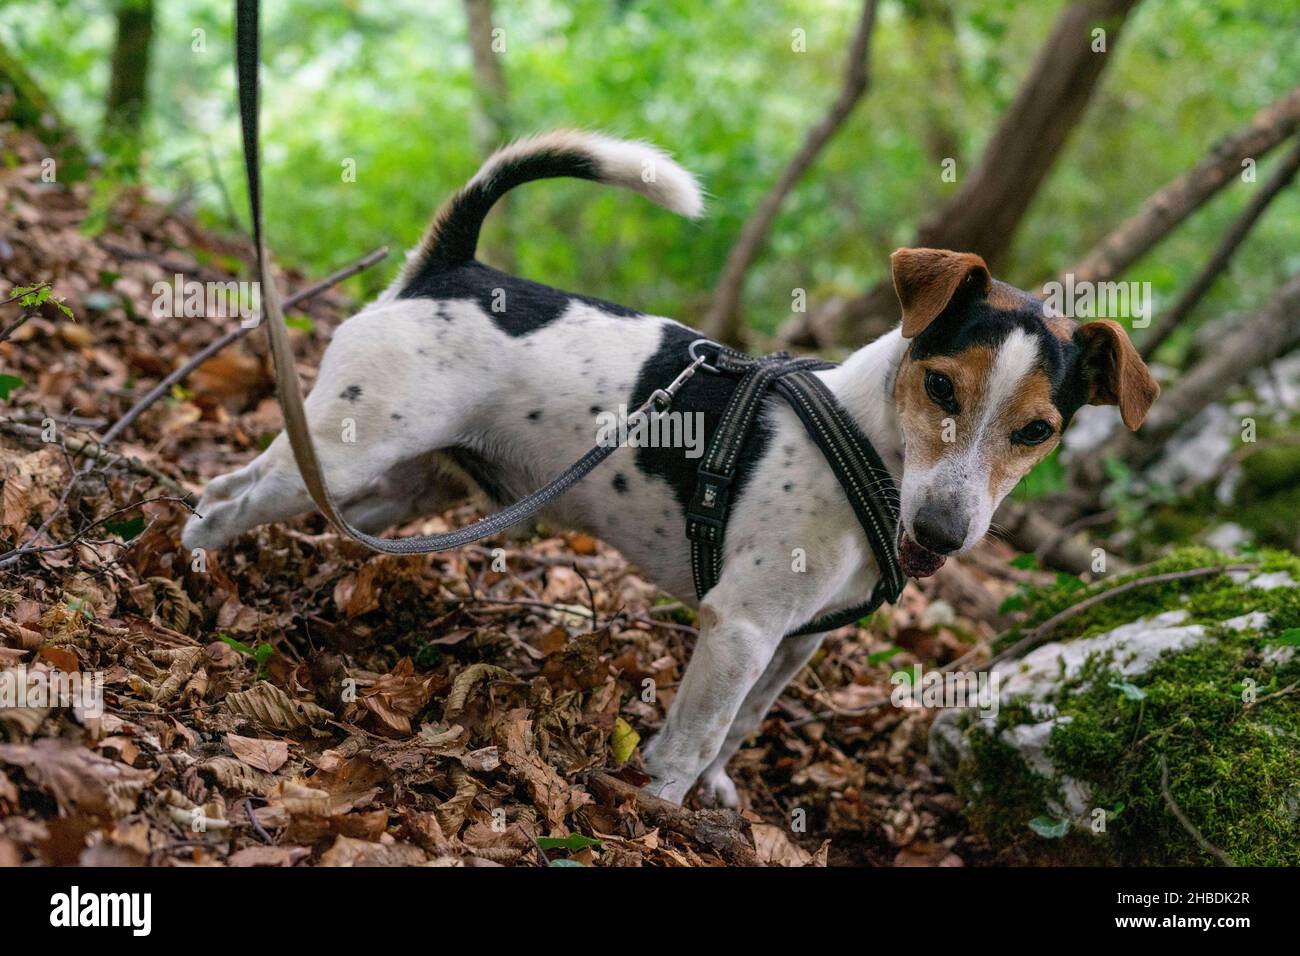 jack russel dog on a leash in a forest Stock Photo